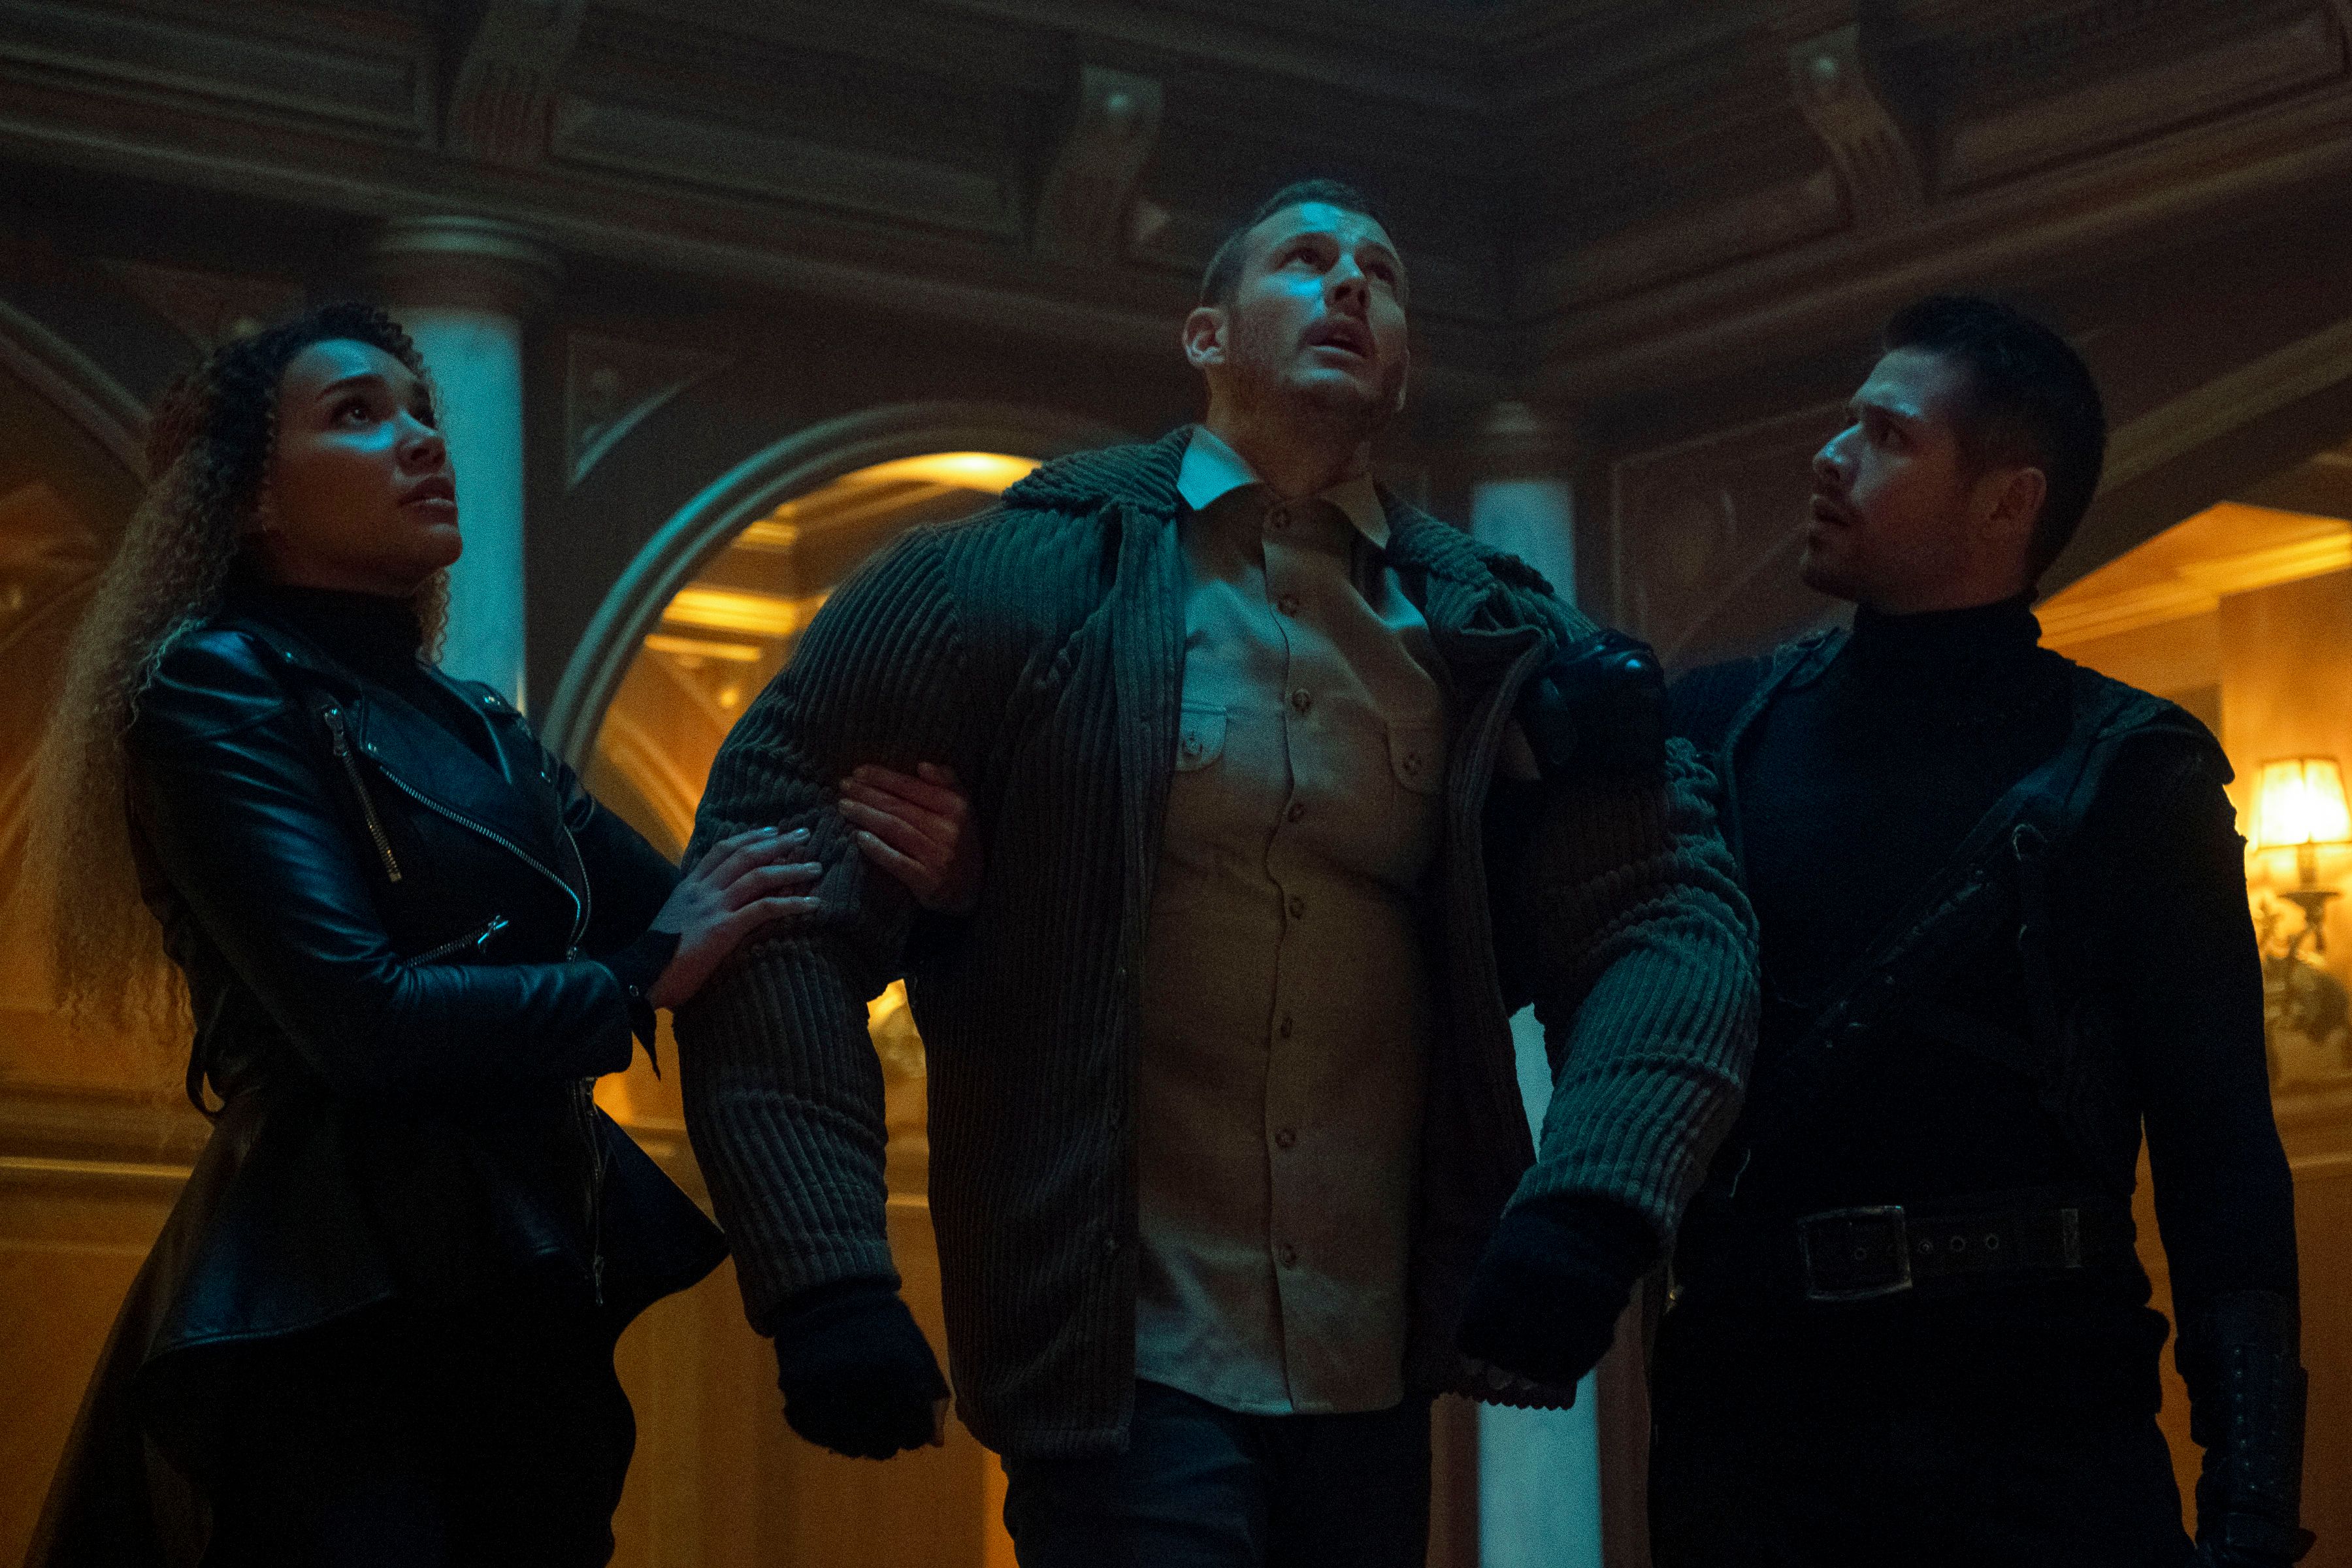 Luther, Allison, and Diego from The Umbrella Academy